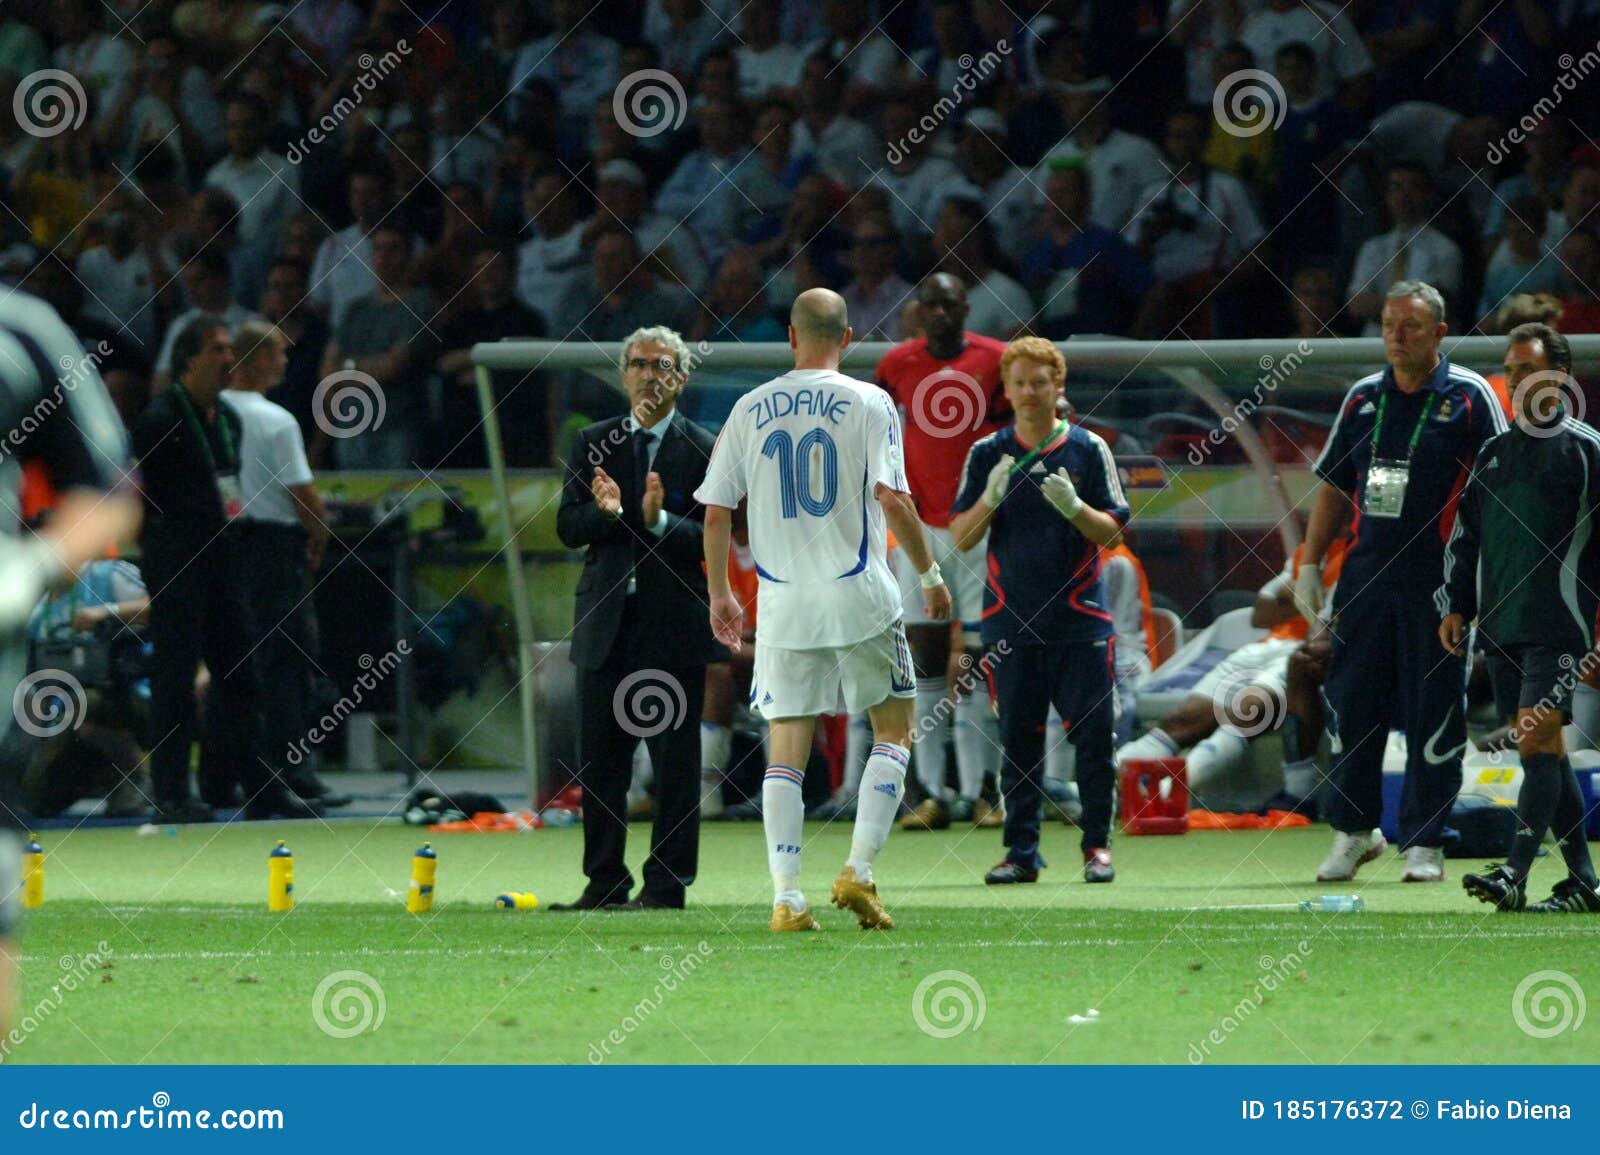 Zinedine Leaves the Field for Card after Foul on Marco Materazzi Editorial Photography - Image world, fifa: 185176372